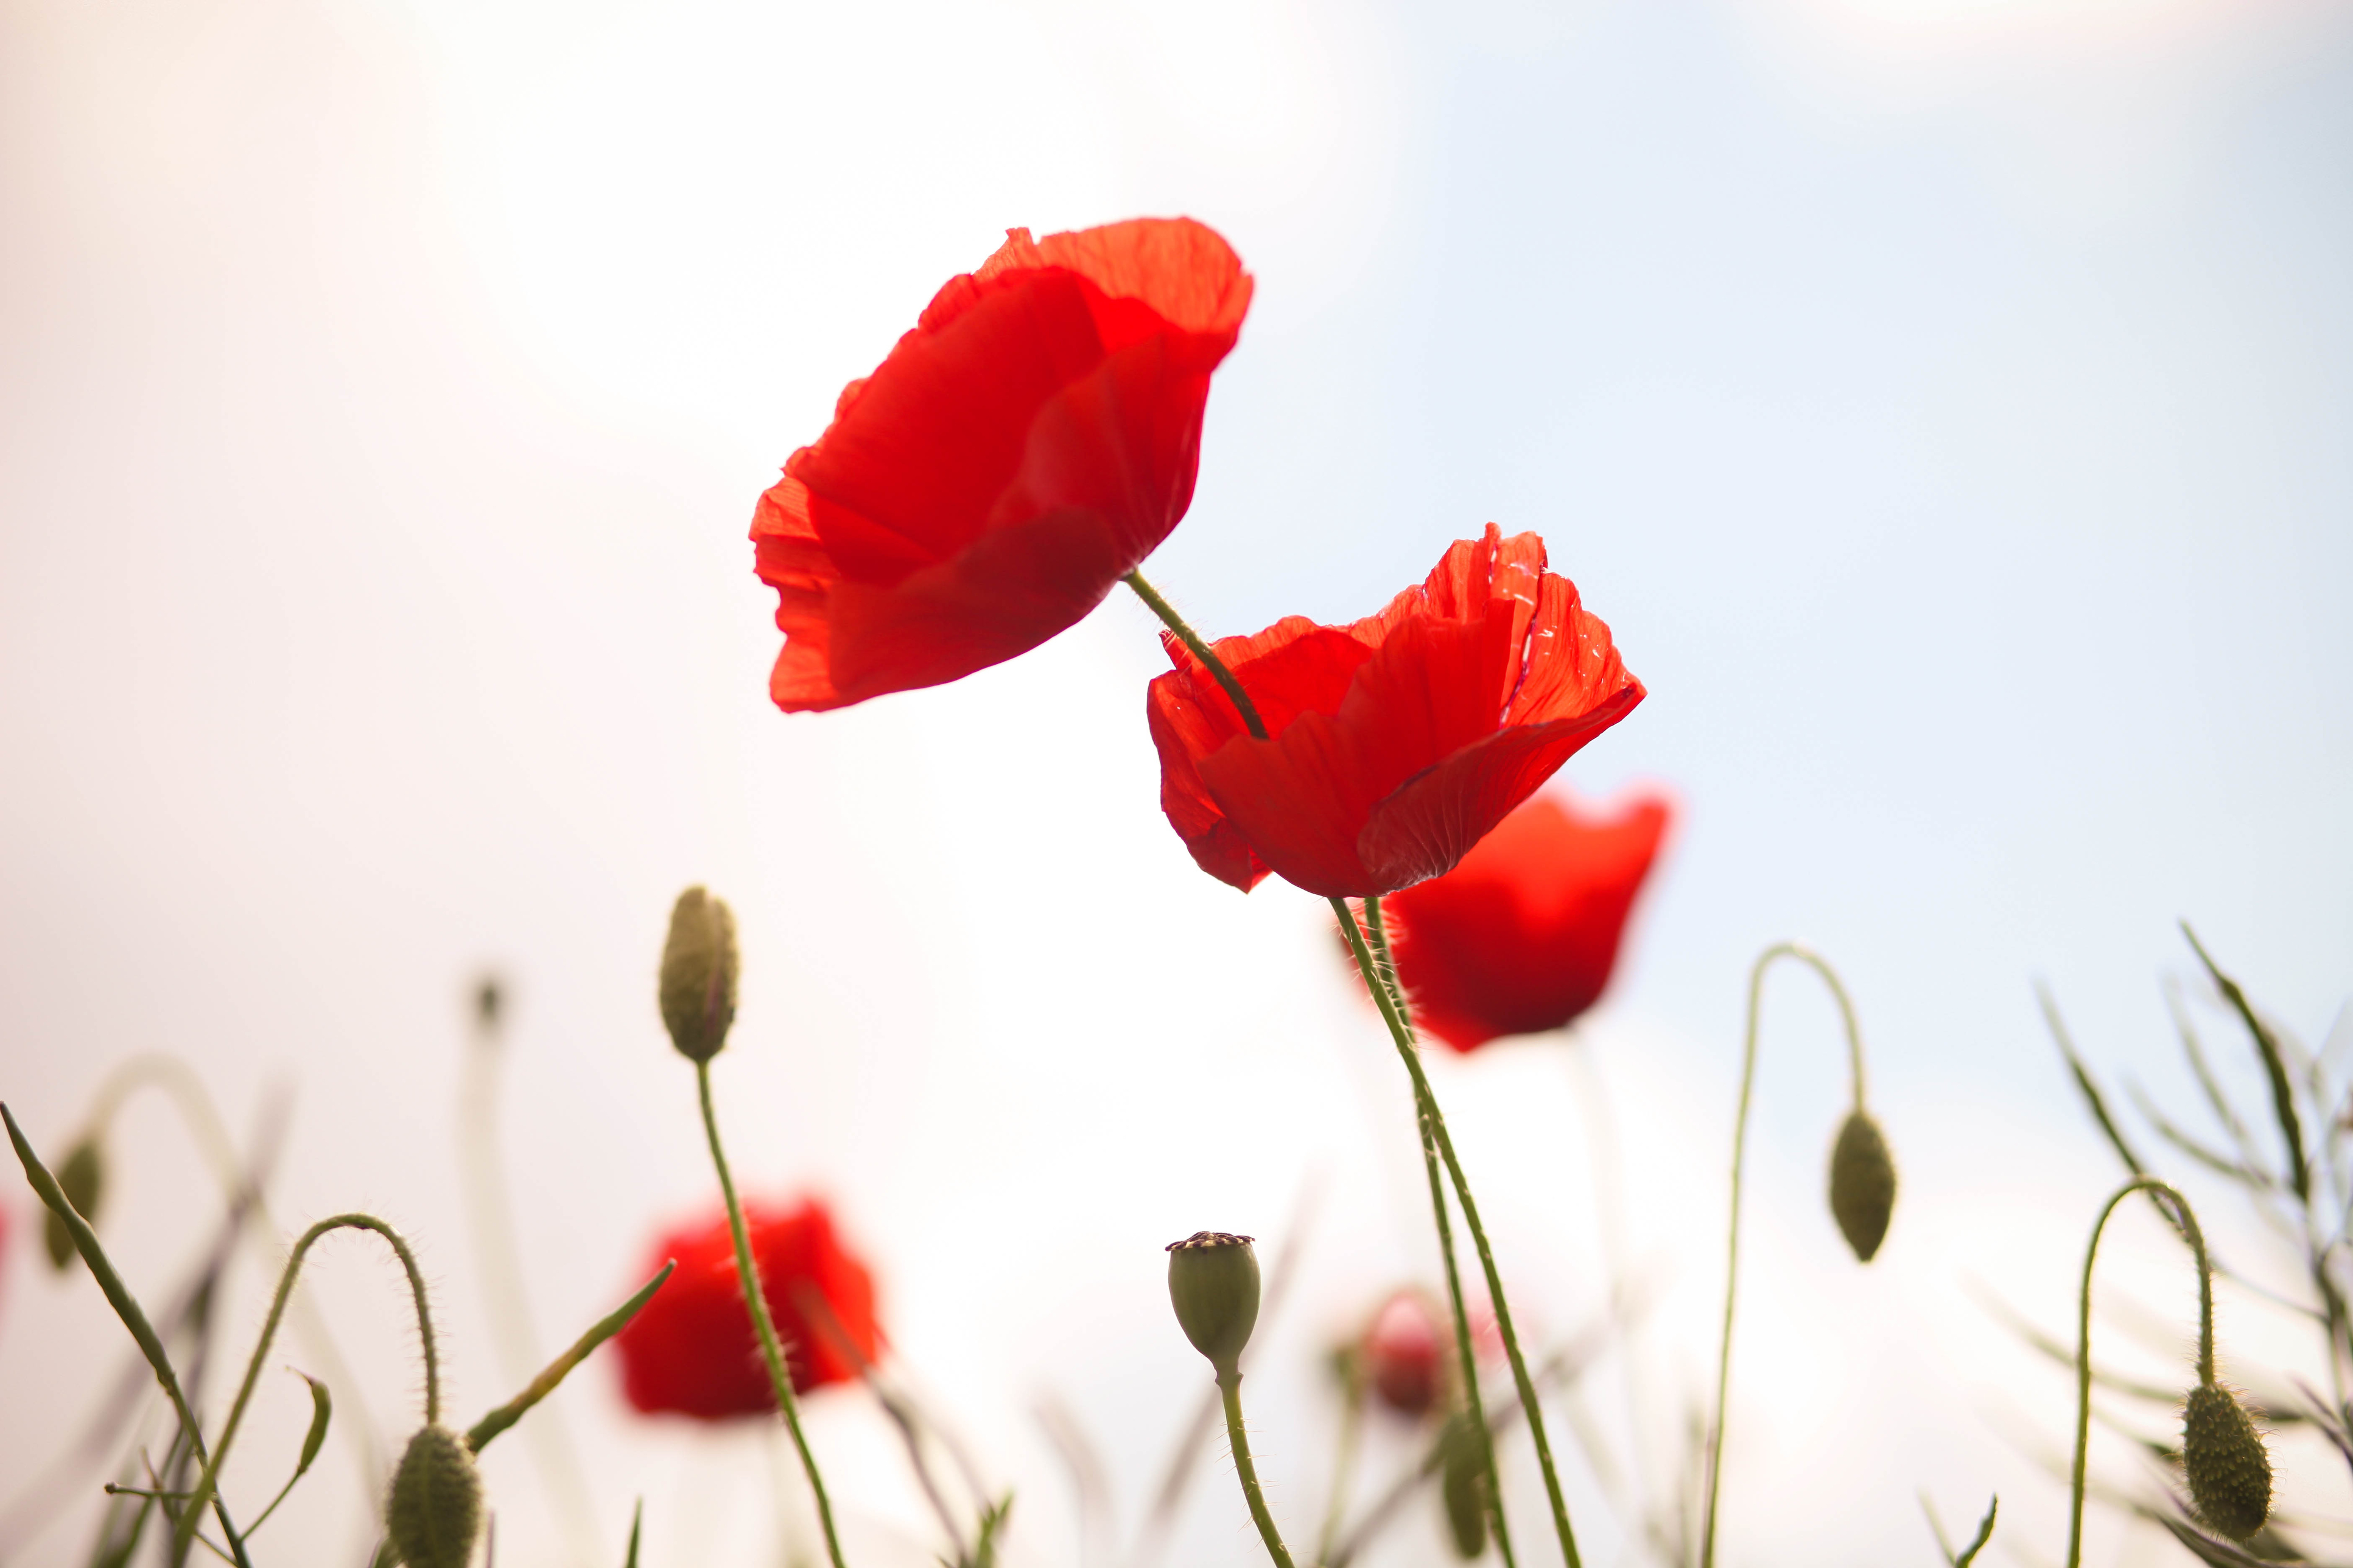 Ten facts you probably didn't know about poppies - Gardens Illustrated